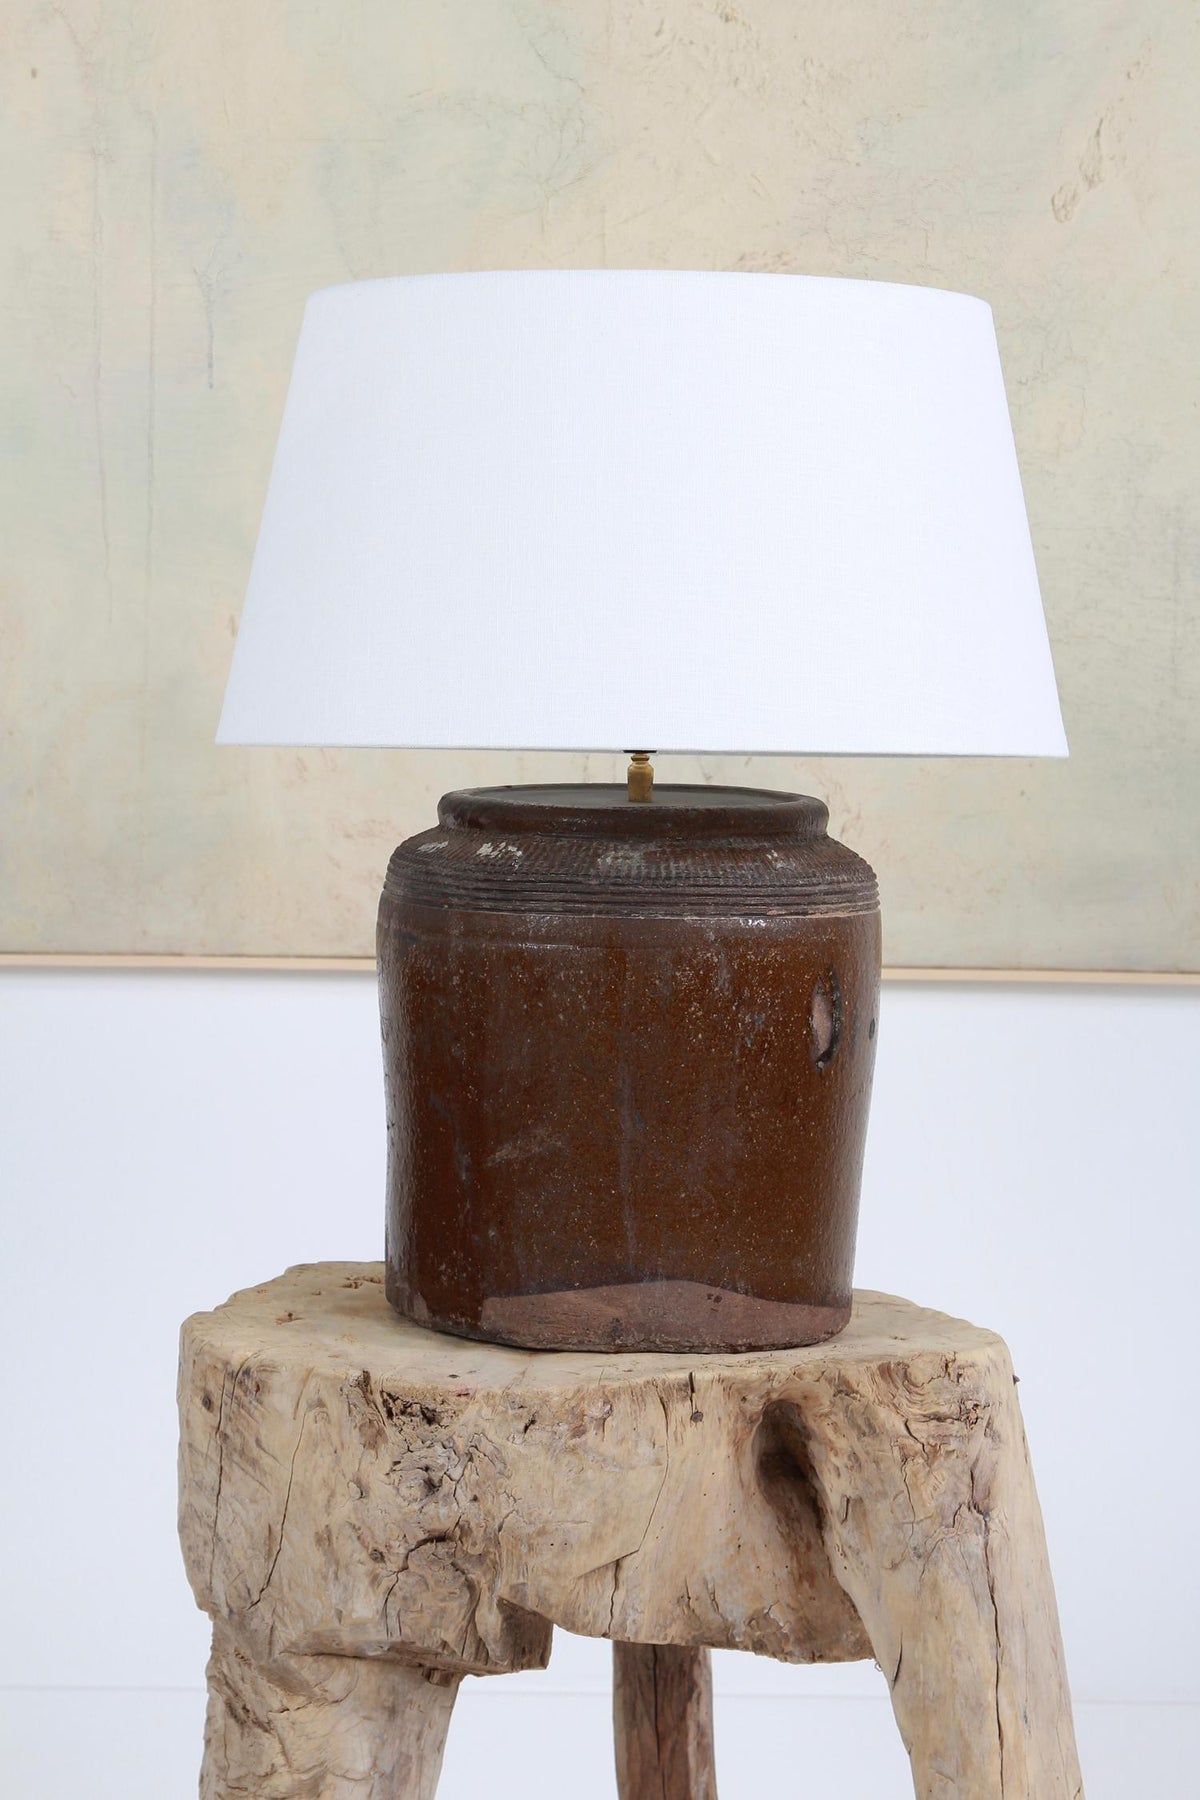 ANTIQUE  CERAMIC WATER POT CONVERTED INTO TABLE LAMP WITH SHADE